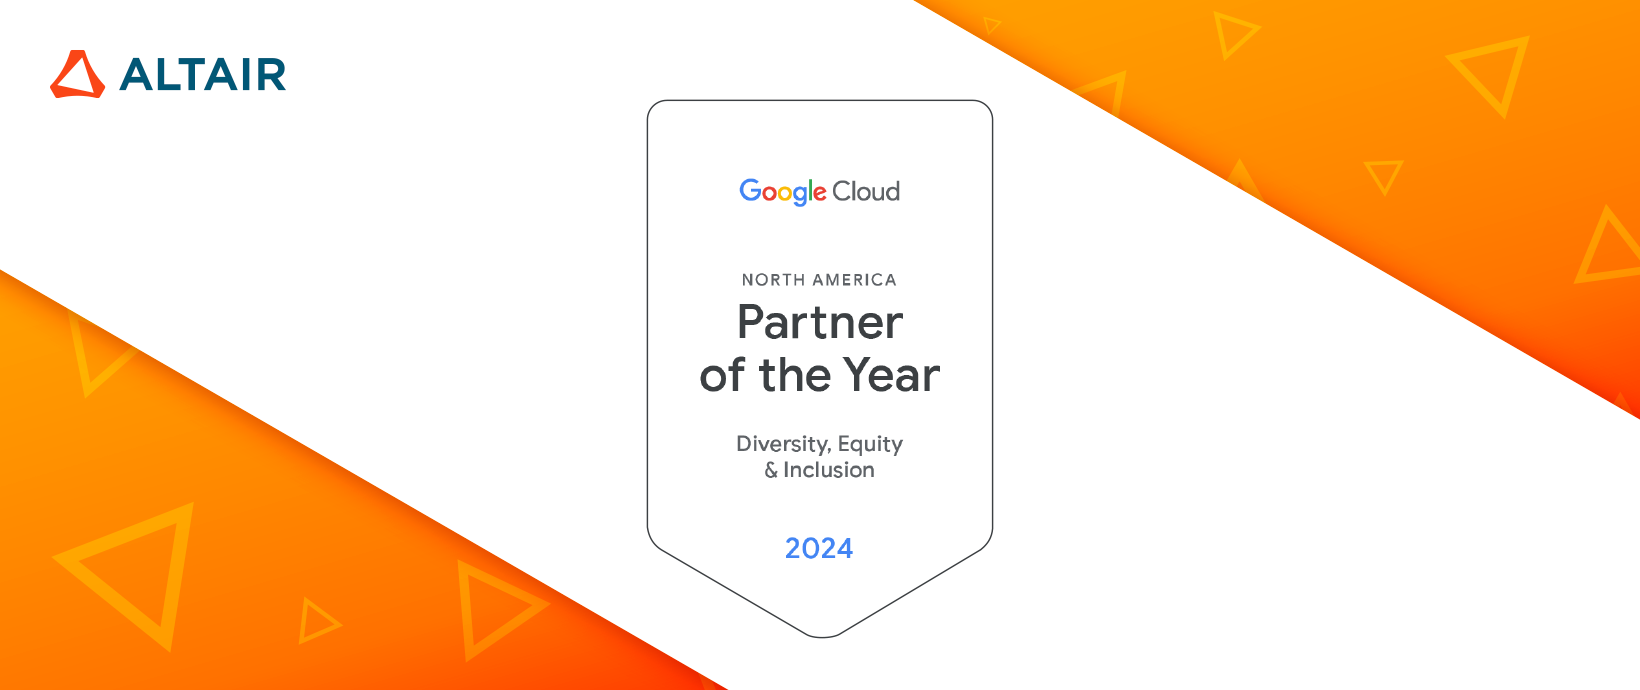 Altair Wins 2024 Google Cloud North America Partner of the Year Award                         for Diversity, Equity, and Inclusion